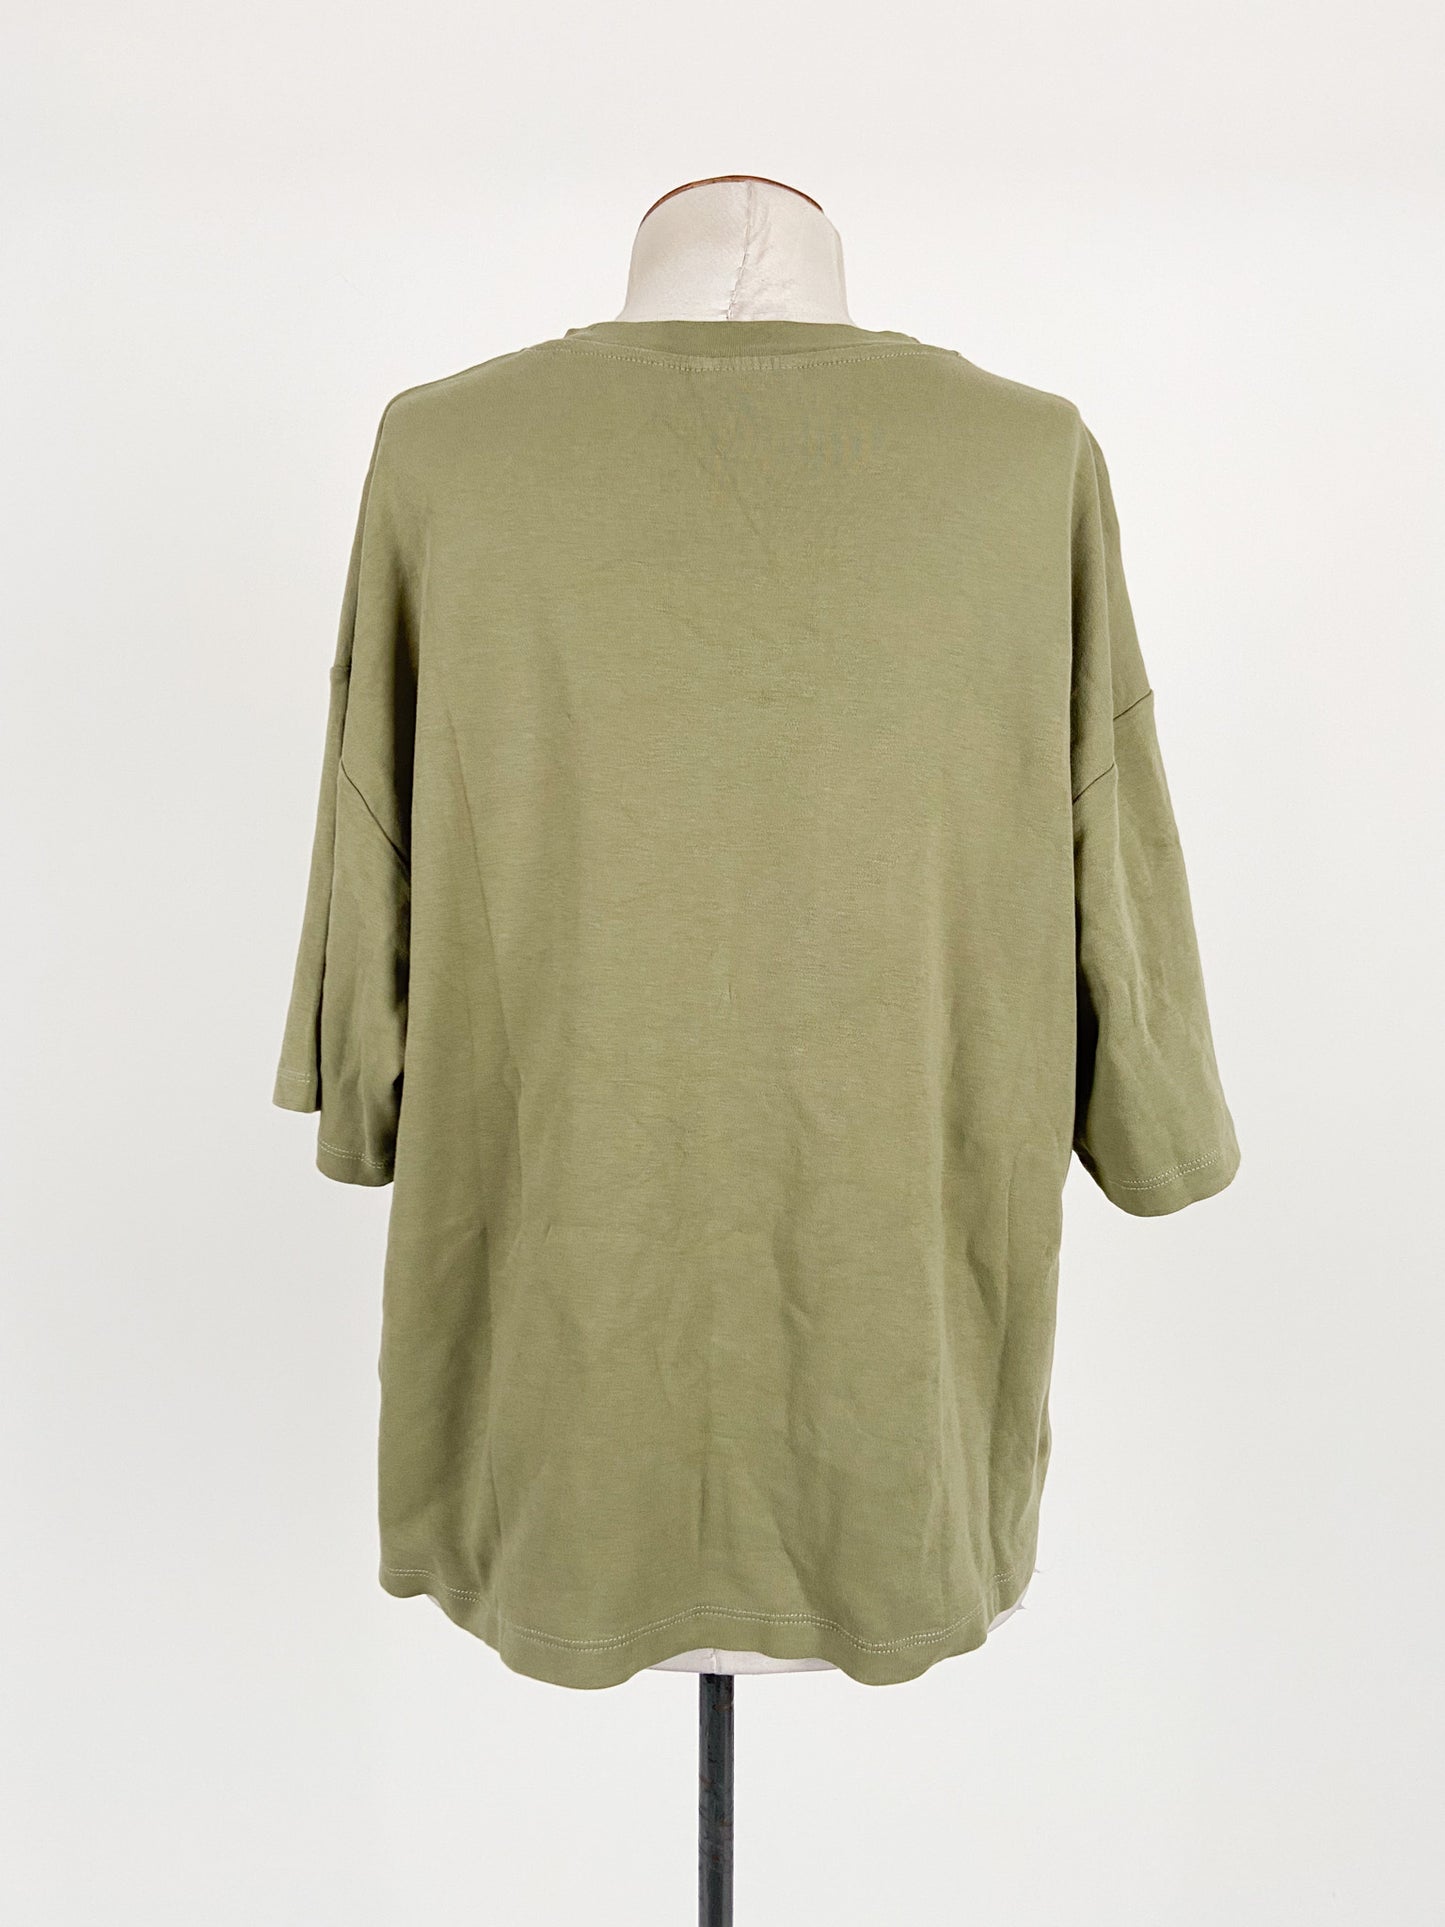 Minimum | Green Casual Top | Size S